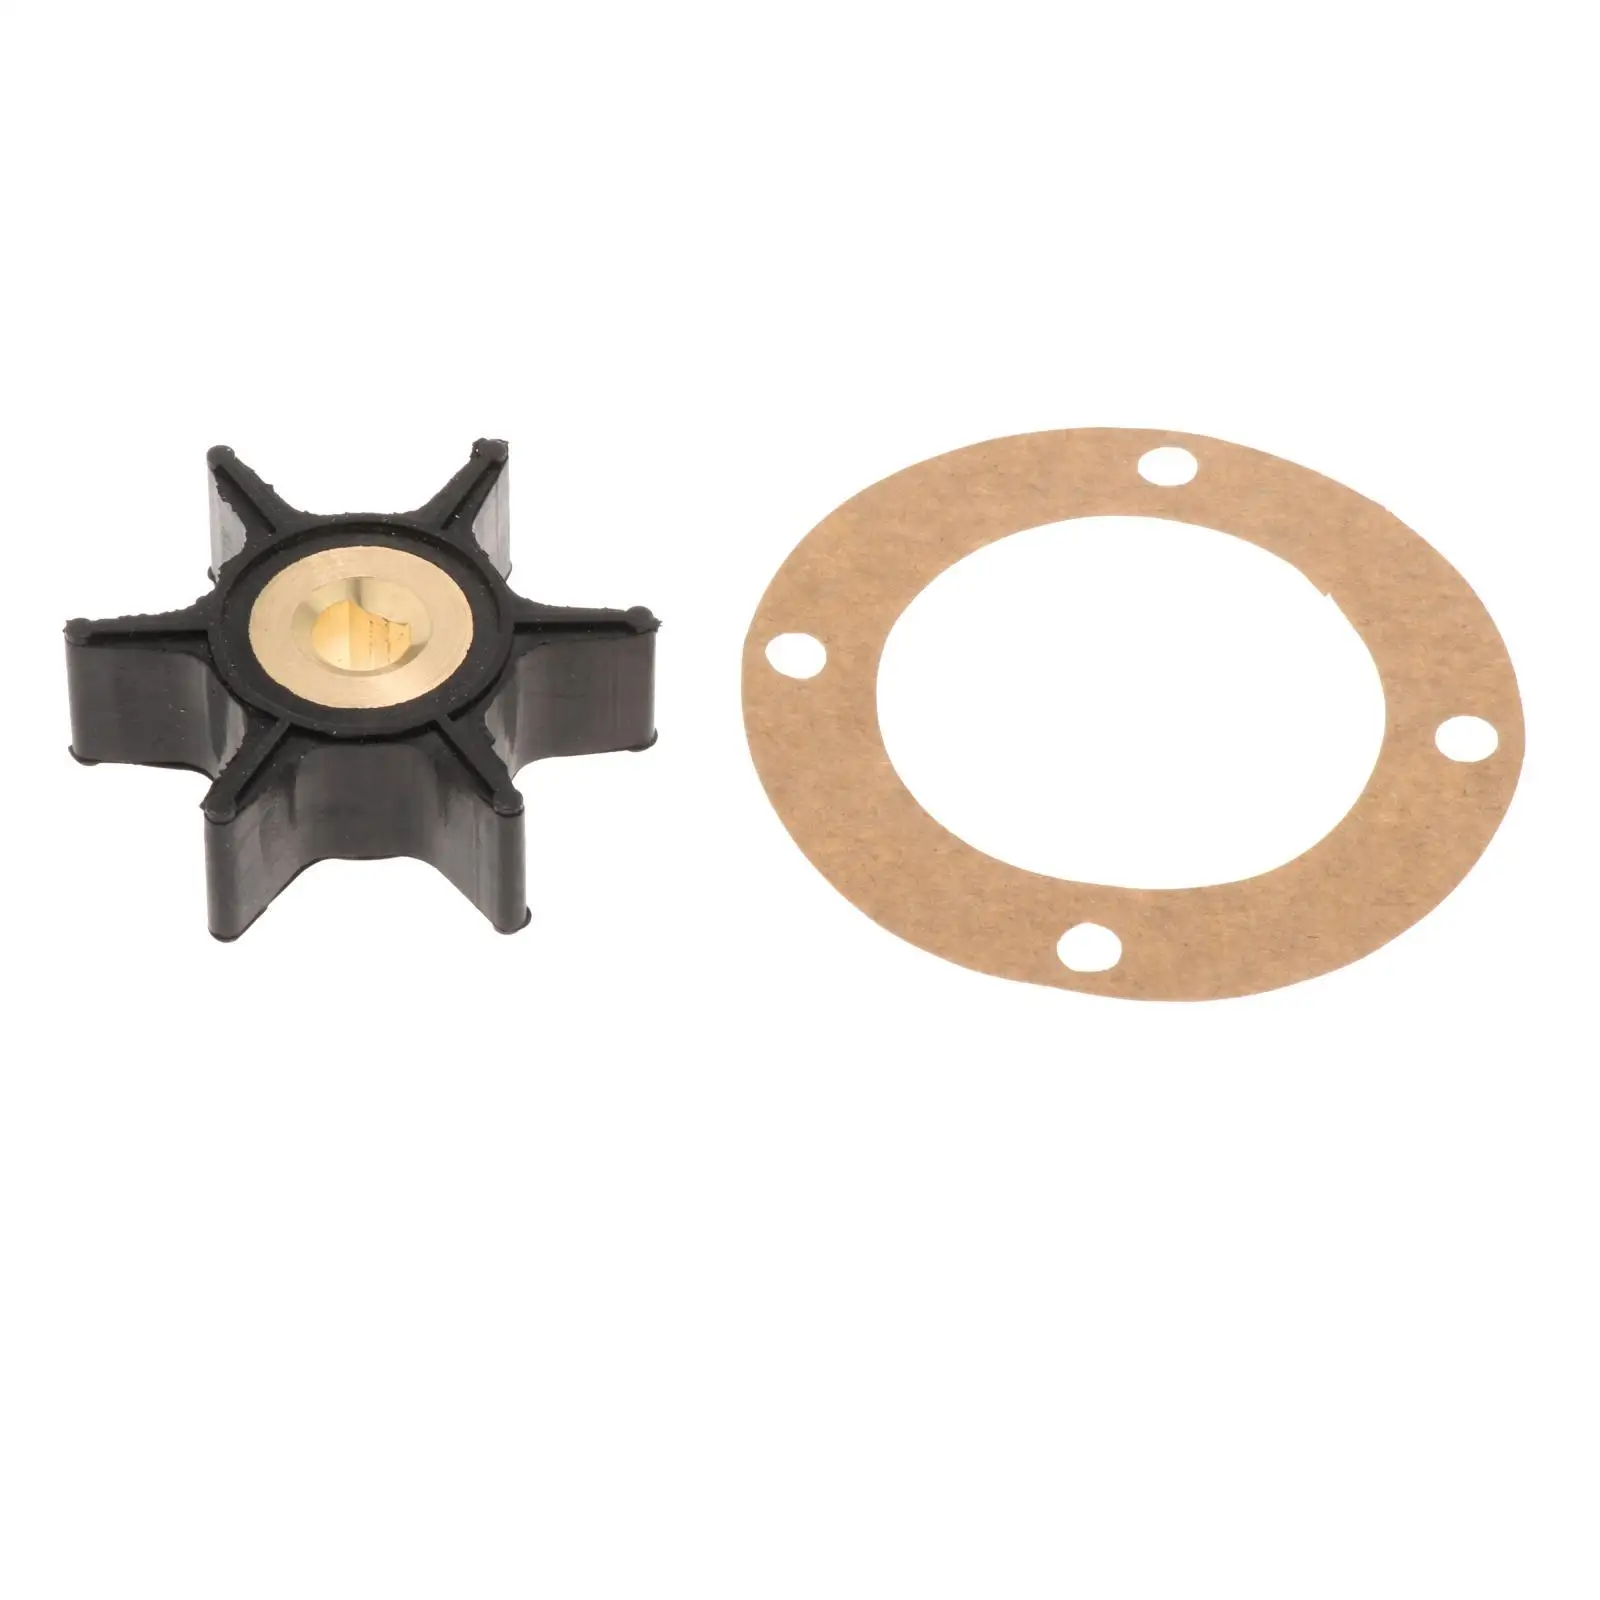 2Pcs Impeller and 4-Hole Gasket Kit for Onan 131-0386 170-3172 131-0257 Pump